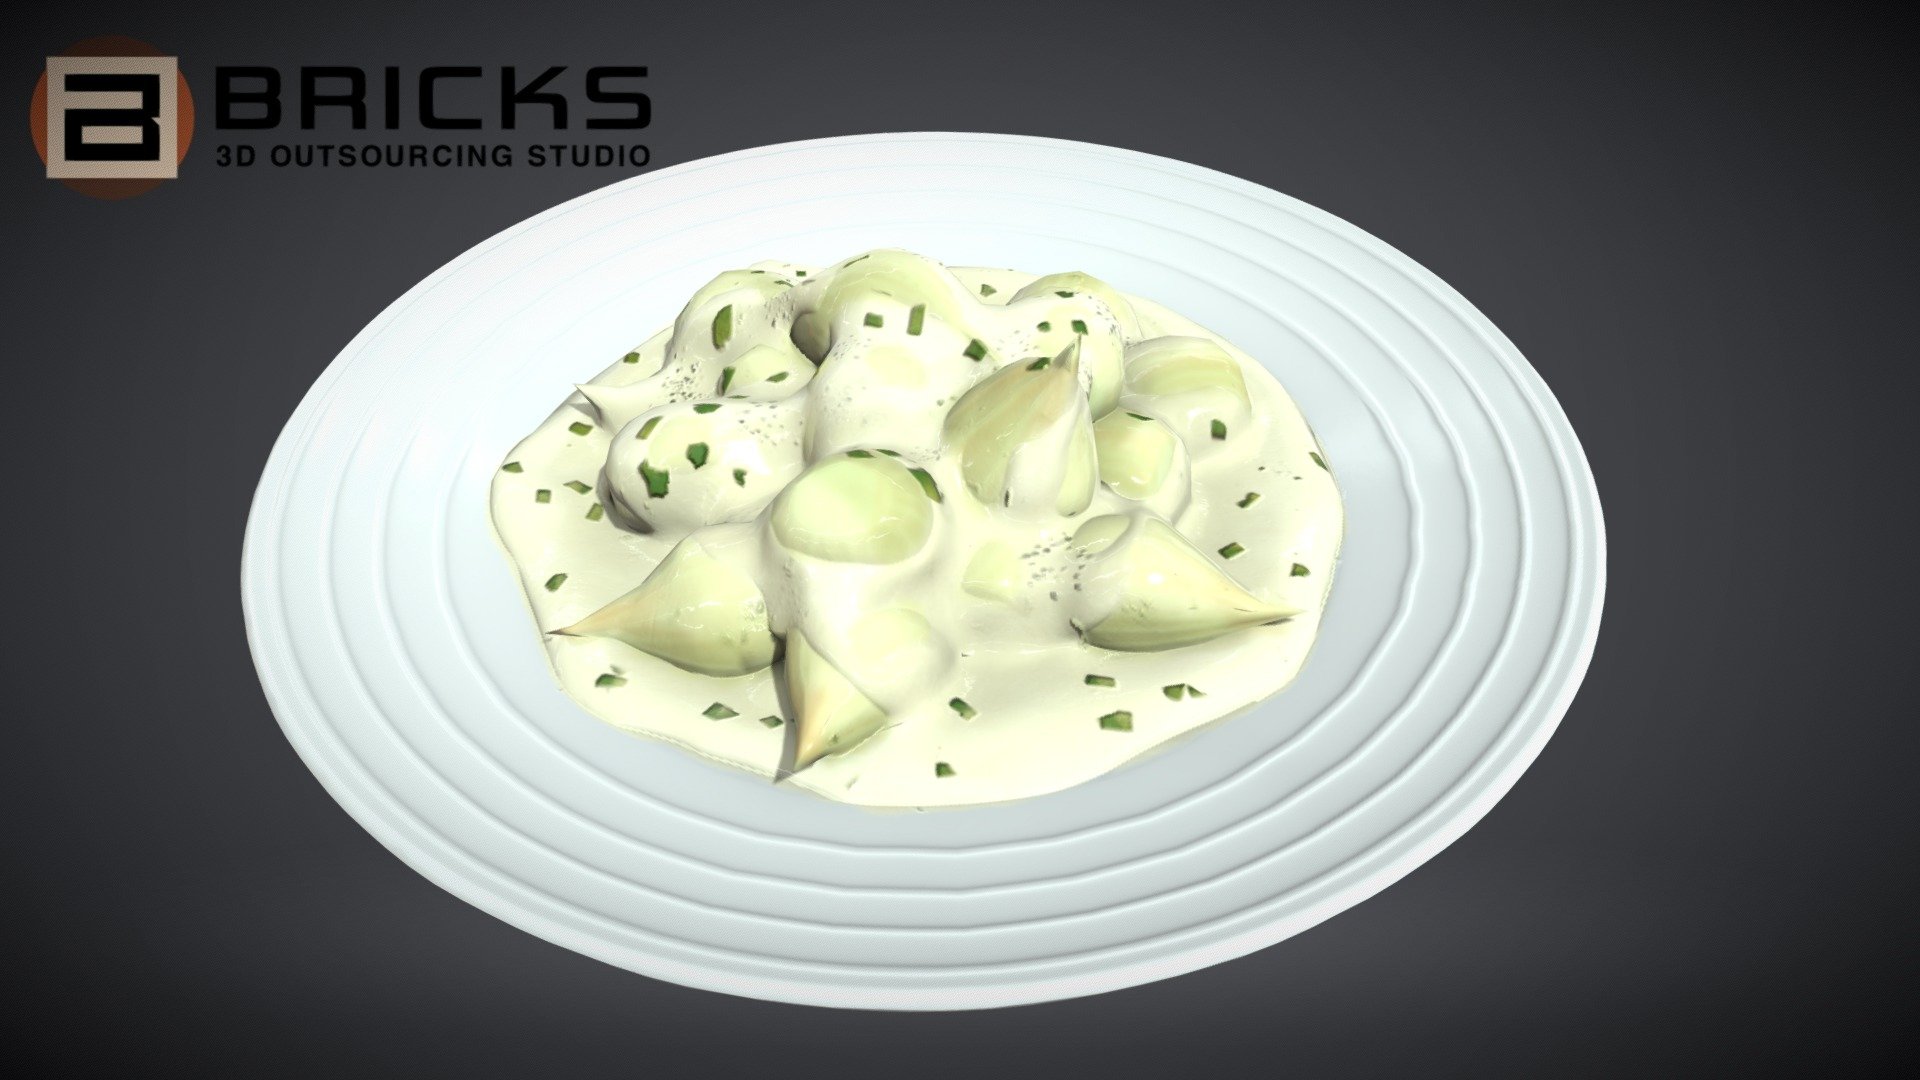 PBR Food Asset:
Creamed Onions
Polycount: 2638
Vertex count: 1322
Texture Size: 2048px x 2048px
Normal: OpenGL

If you need any adjust in file please contact us: team@bricks3dstudio.com

Hire us: tringuyen@bricks3dstudio.com
Here is us: https://www.bricks3dstudio.com/
        https://www.artstation.com/bricksstudio
        https://www.facebook.com/Bricks3dstudio/
        https://www.linkedin.com/in/bricks-studio-b10462252/ - Creamed Onions - Buy Royalty Free 3D model by Bricks Studio (@bricks3dstudio) 3d model